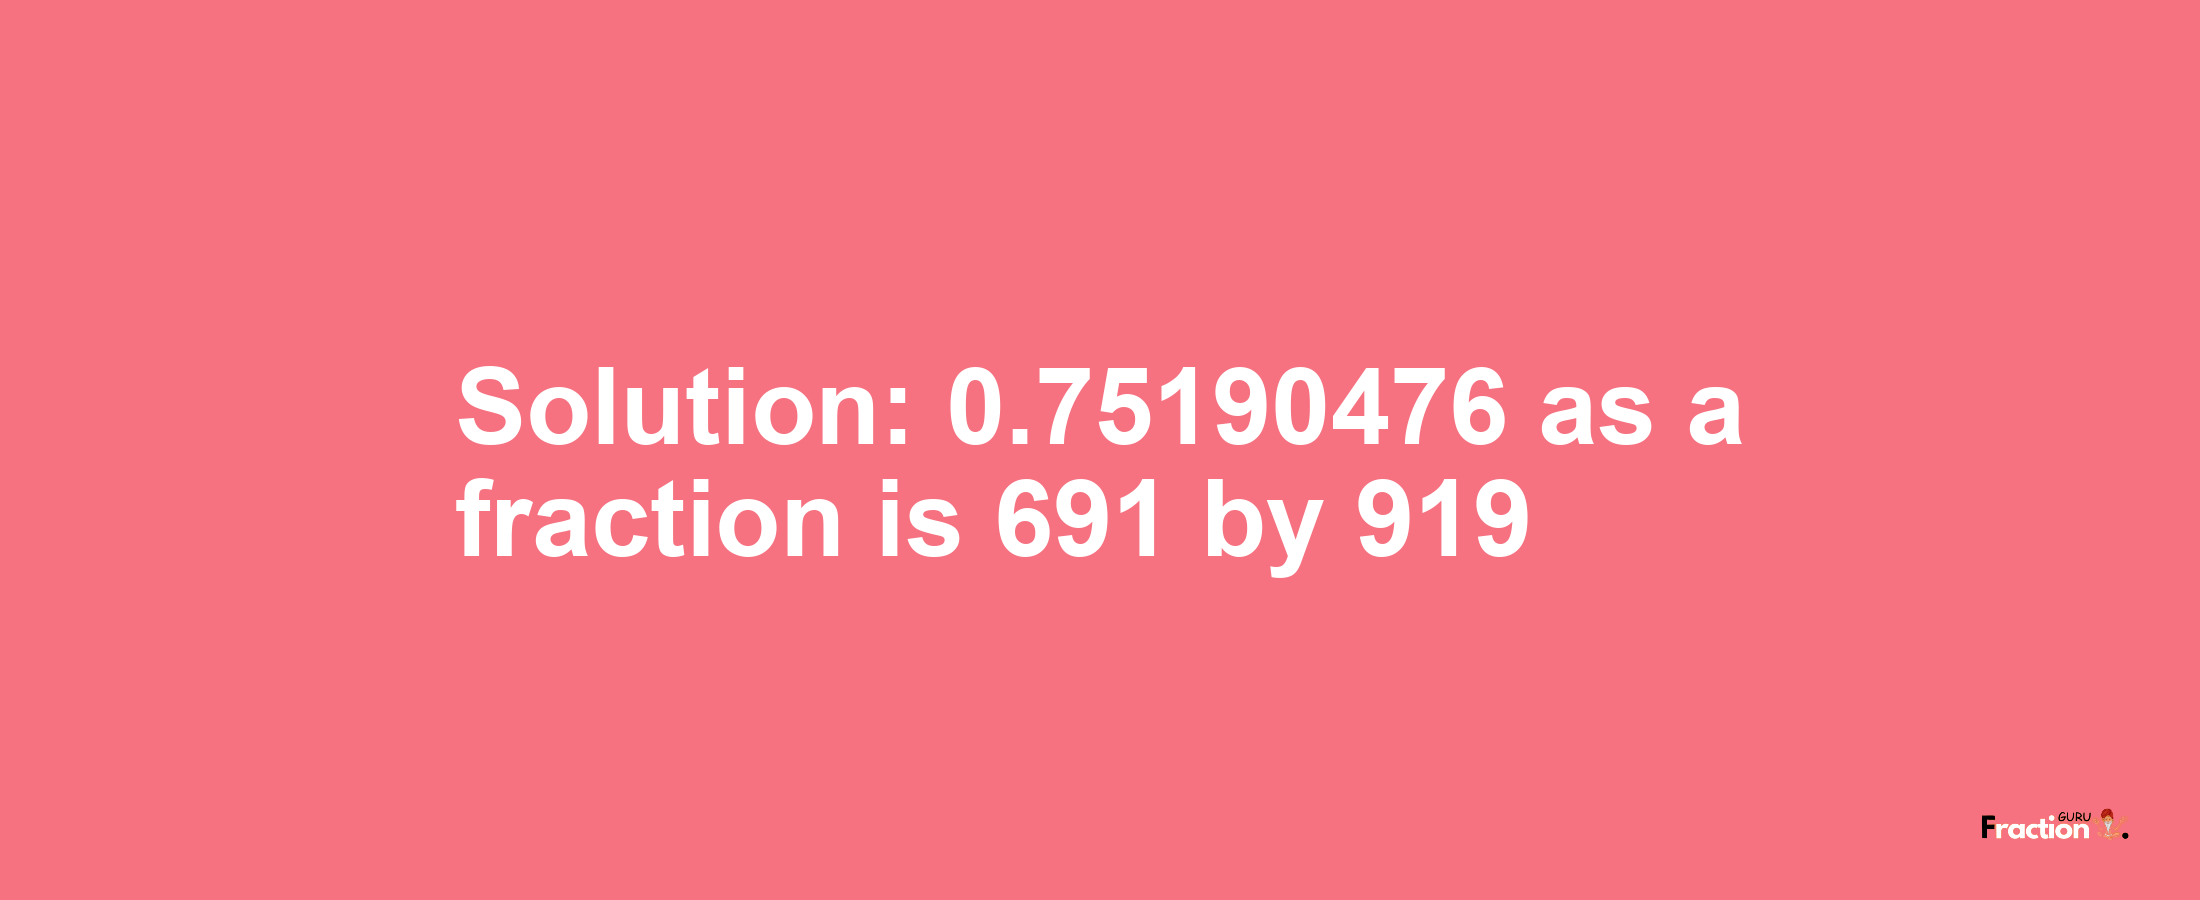 Solution:0.75190476 as a fraction is 691/919